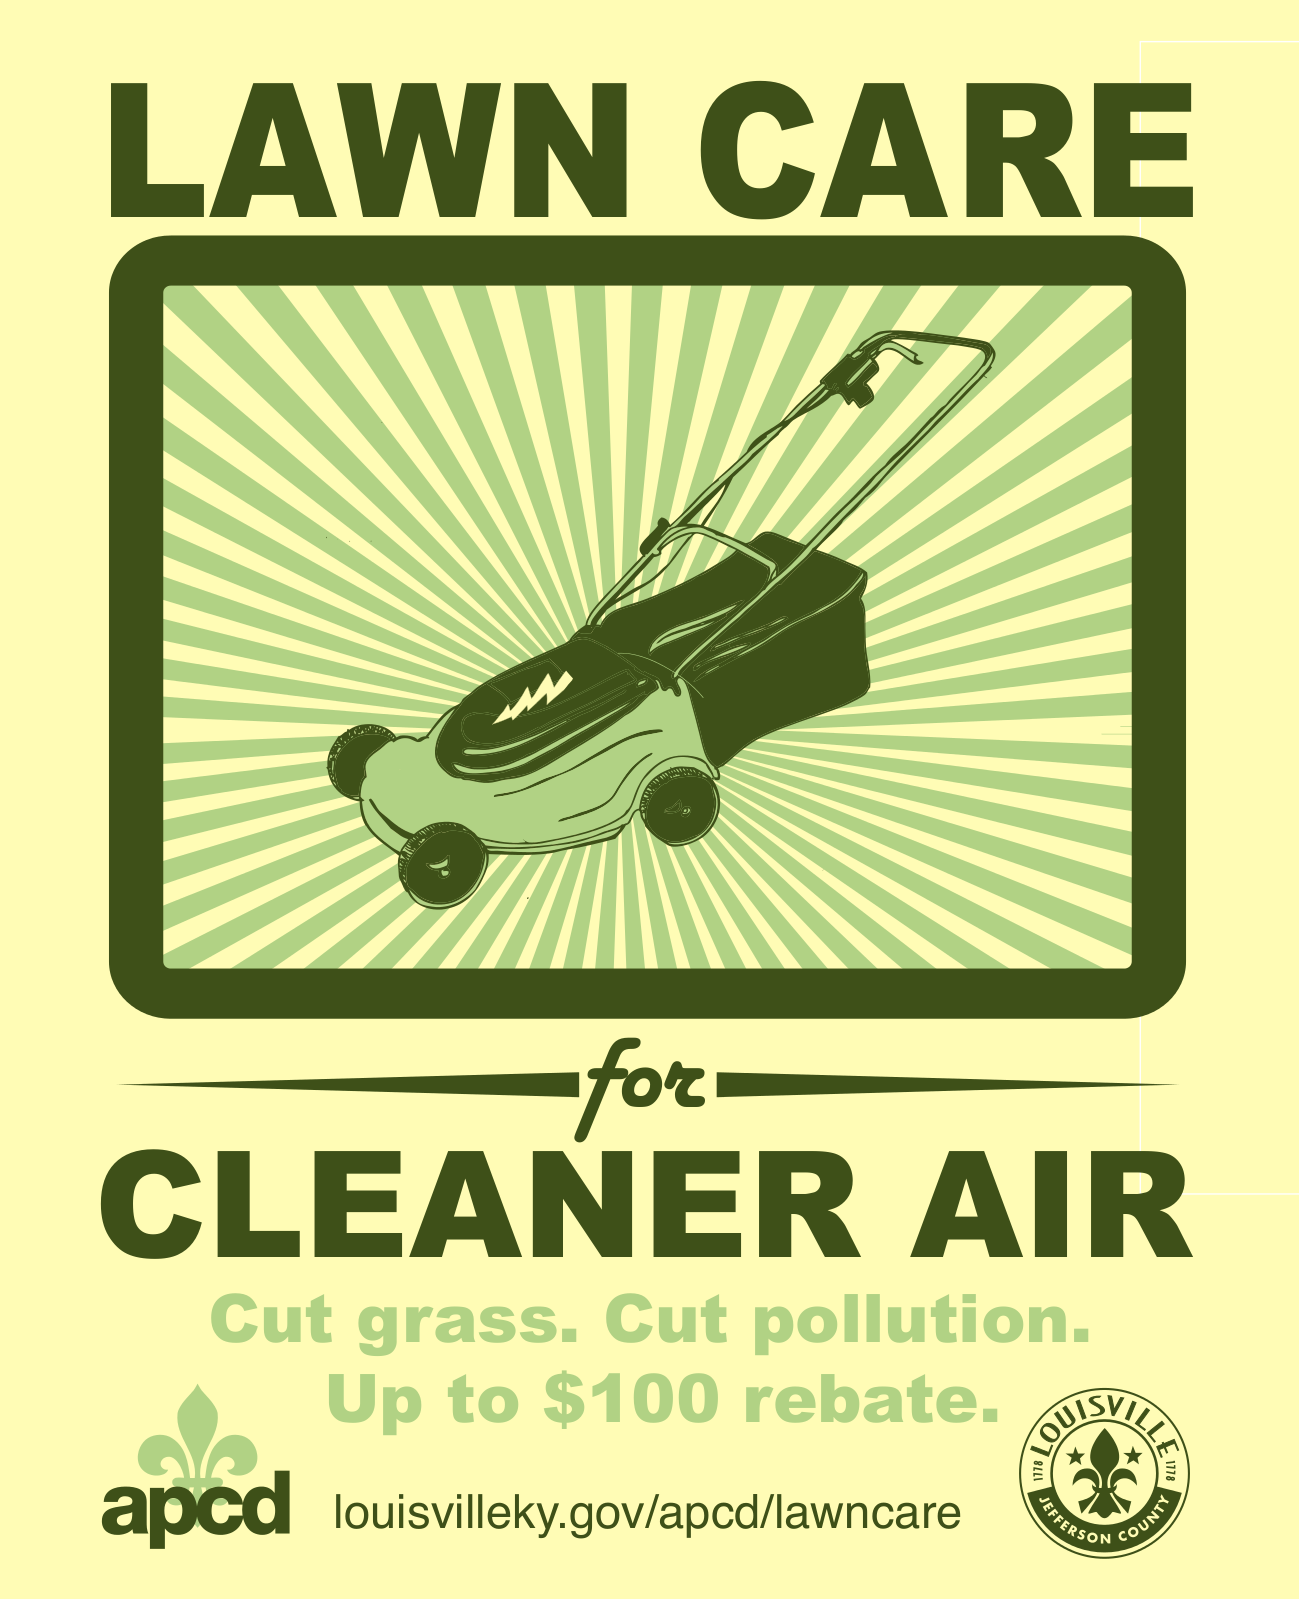 Lawn Care Cleaner Air 2021